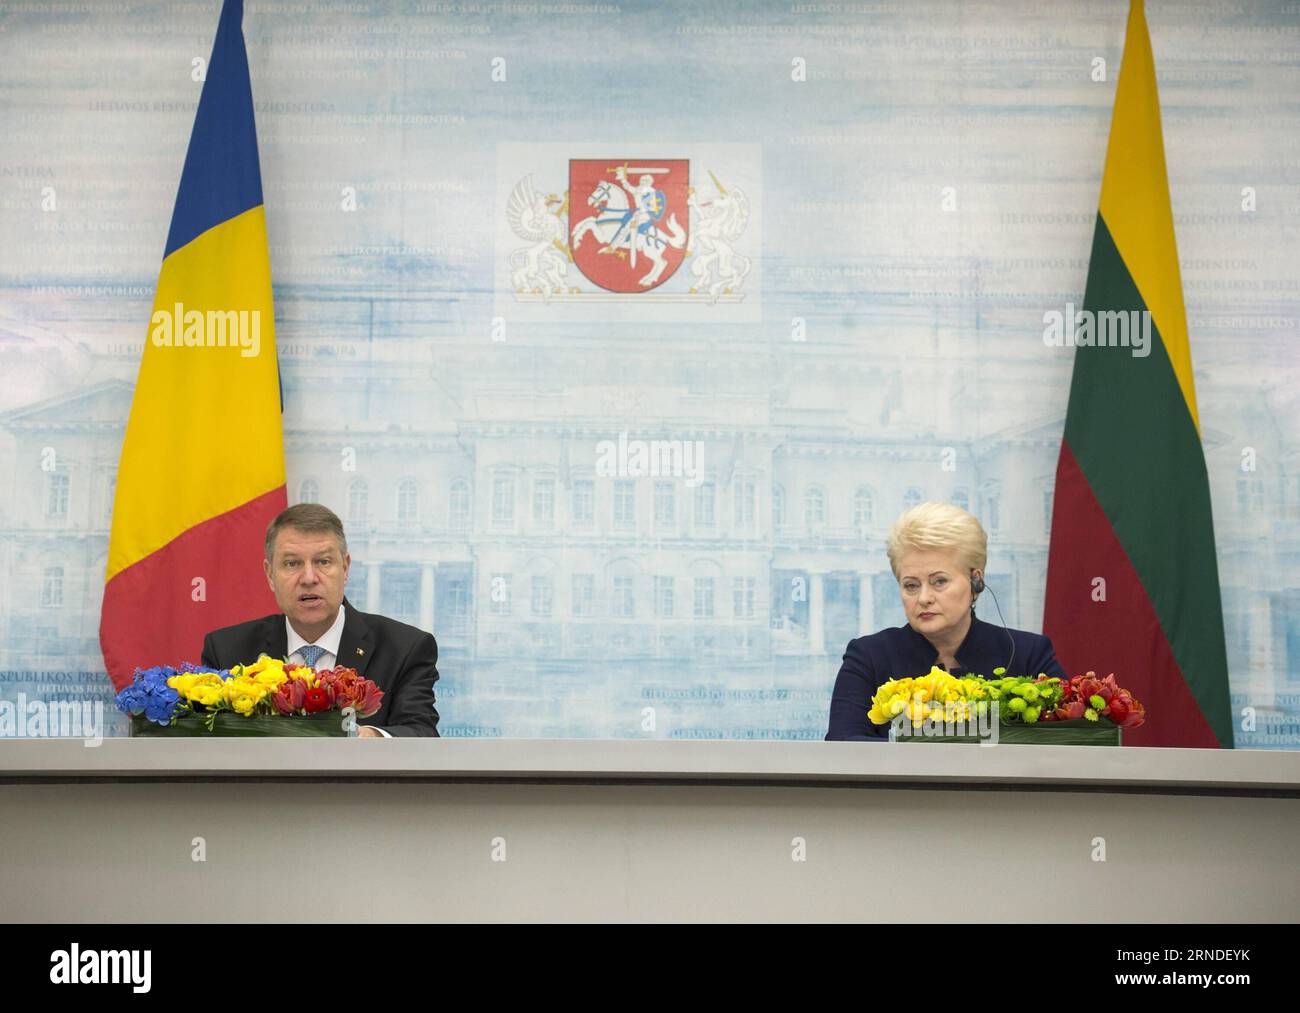 (160518) -- VILNIUS, May 18, 2016 -- Lithuanian President Dalia Grybauskaite (R) and Romanian President Klaus Iohannis attend a press conference in Vilnius, Lithuania, May 18, 2016. Lithuanian President Dalia Grybauskaite met with Romanian President Klaus Iohannis on Wednesday. The two sides talked about regional security situation, EU energy security, migration crisis in Europe, the upcoming NATO summit and bilateral cooperation, etc. ) (cyc) LITHUANIA-VILNIUS-PRESIDENTS-MEETING AlfredasxPliadis PUBLICATIONxNOTxINxCHN   160518 Vilnius May 18 2016 Lithuanian President Dalia Grybauskaite r and Stock Photo